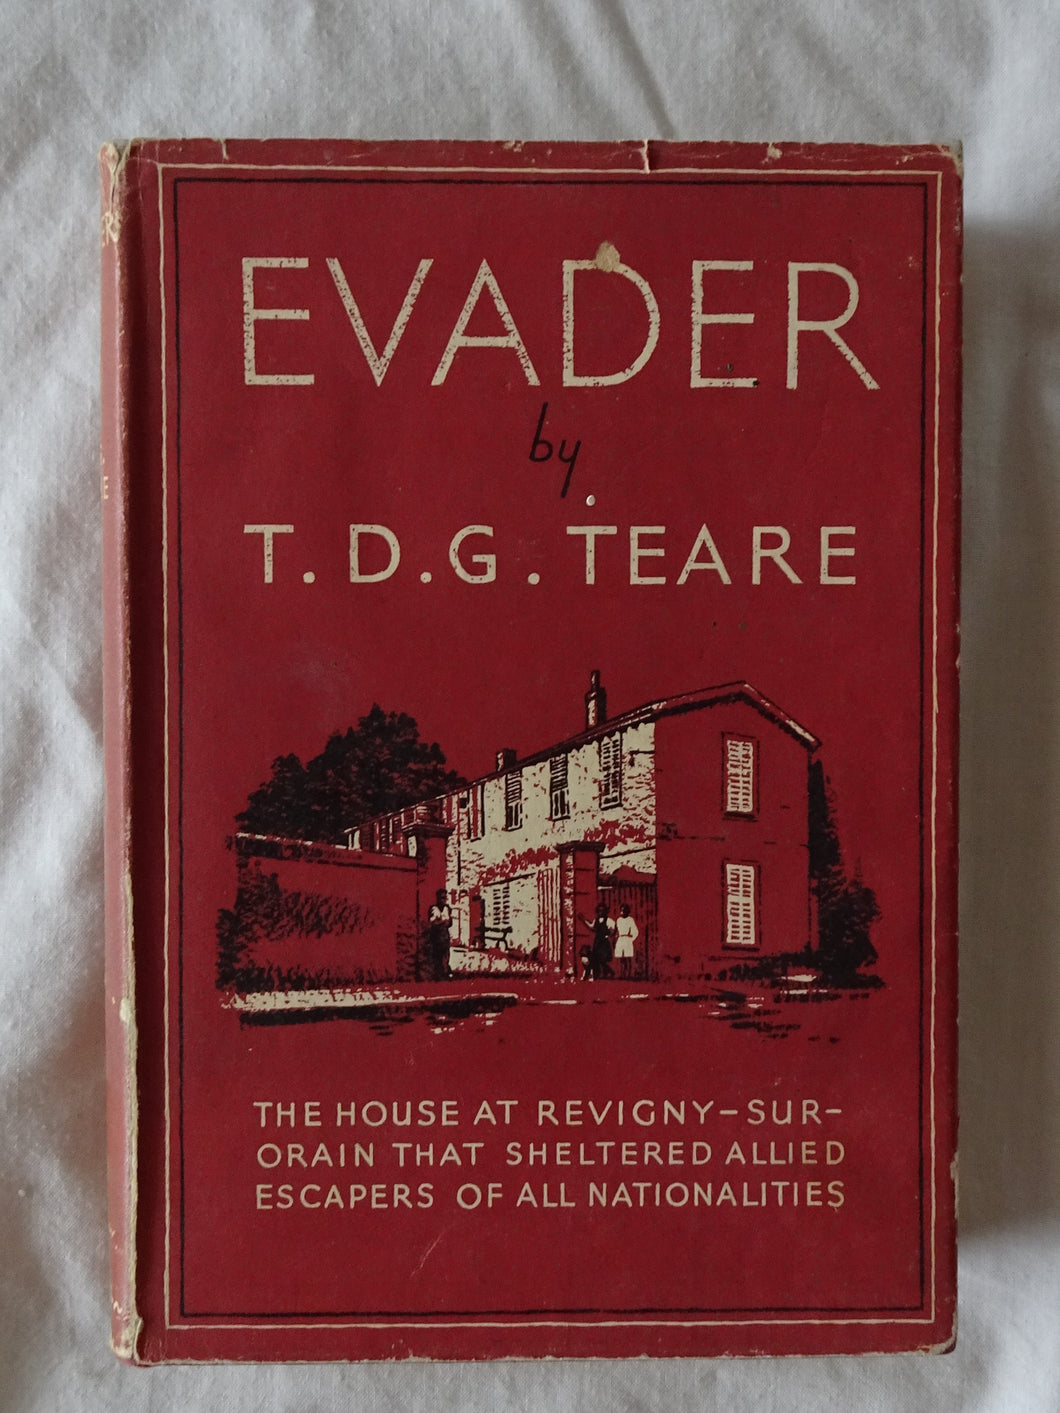 Evader  by T. D. G. Teare